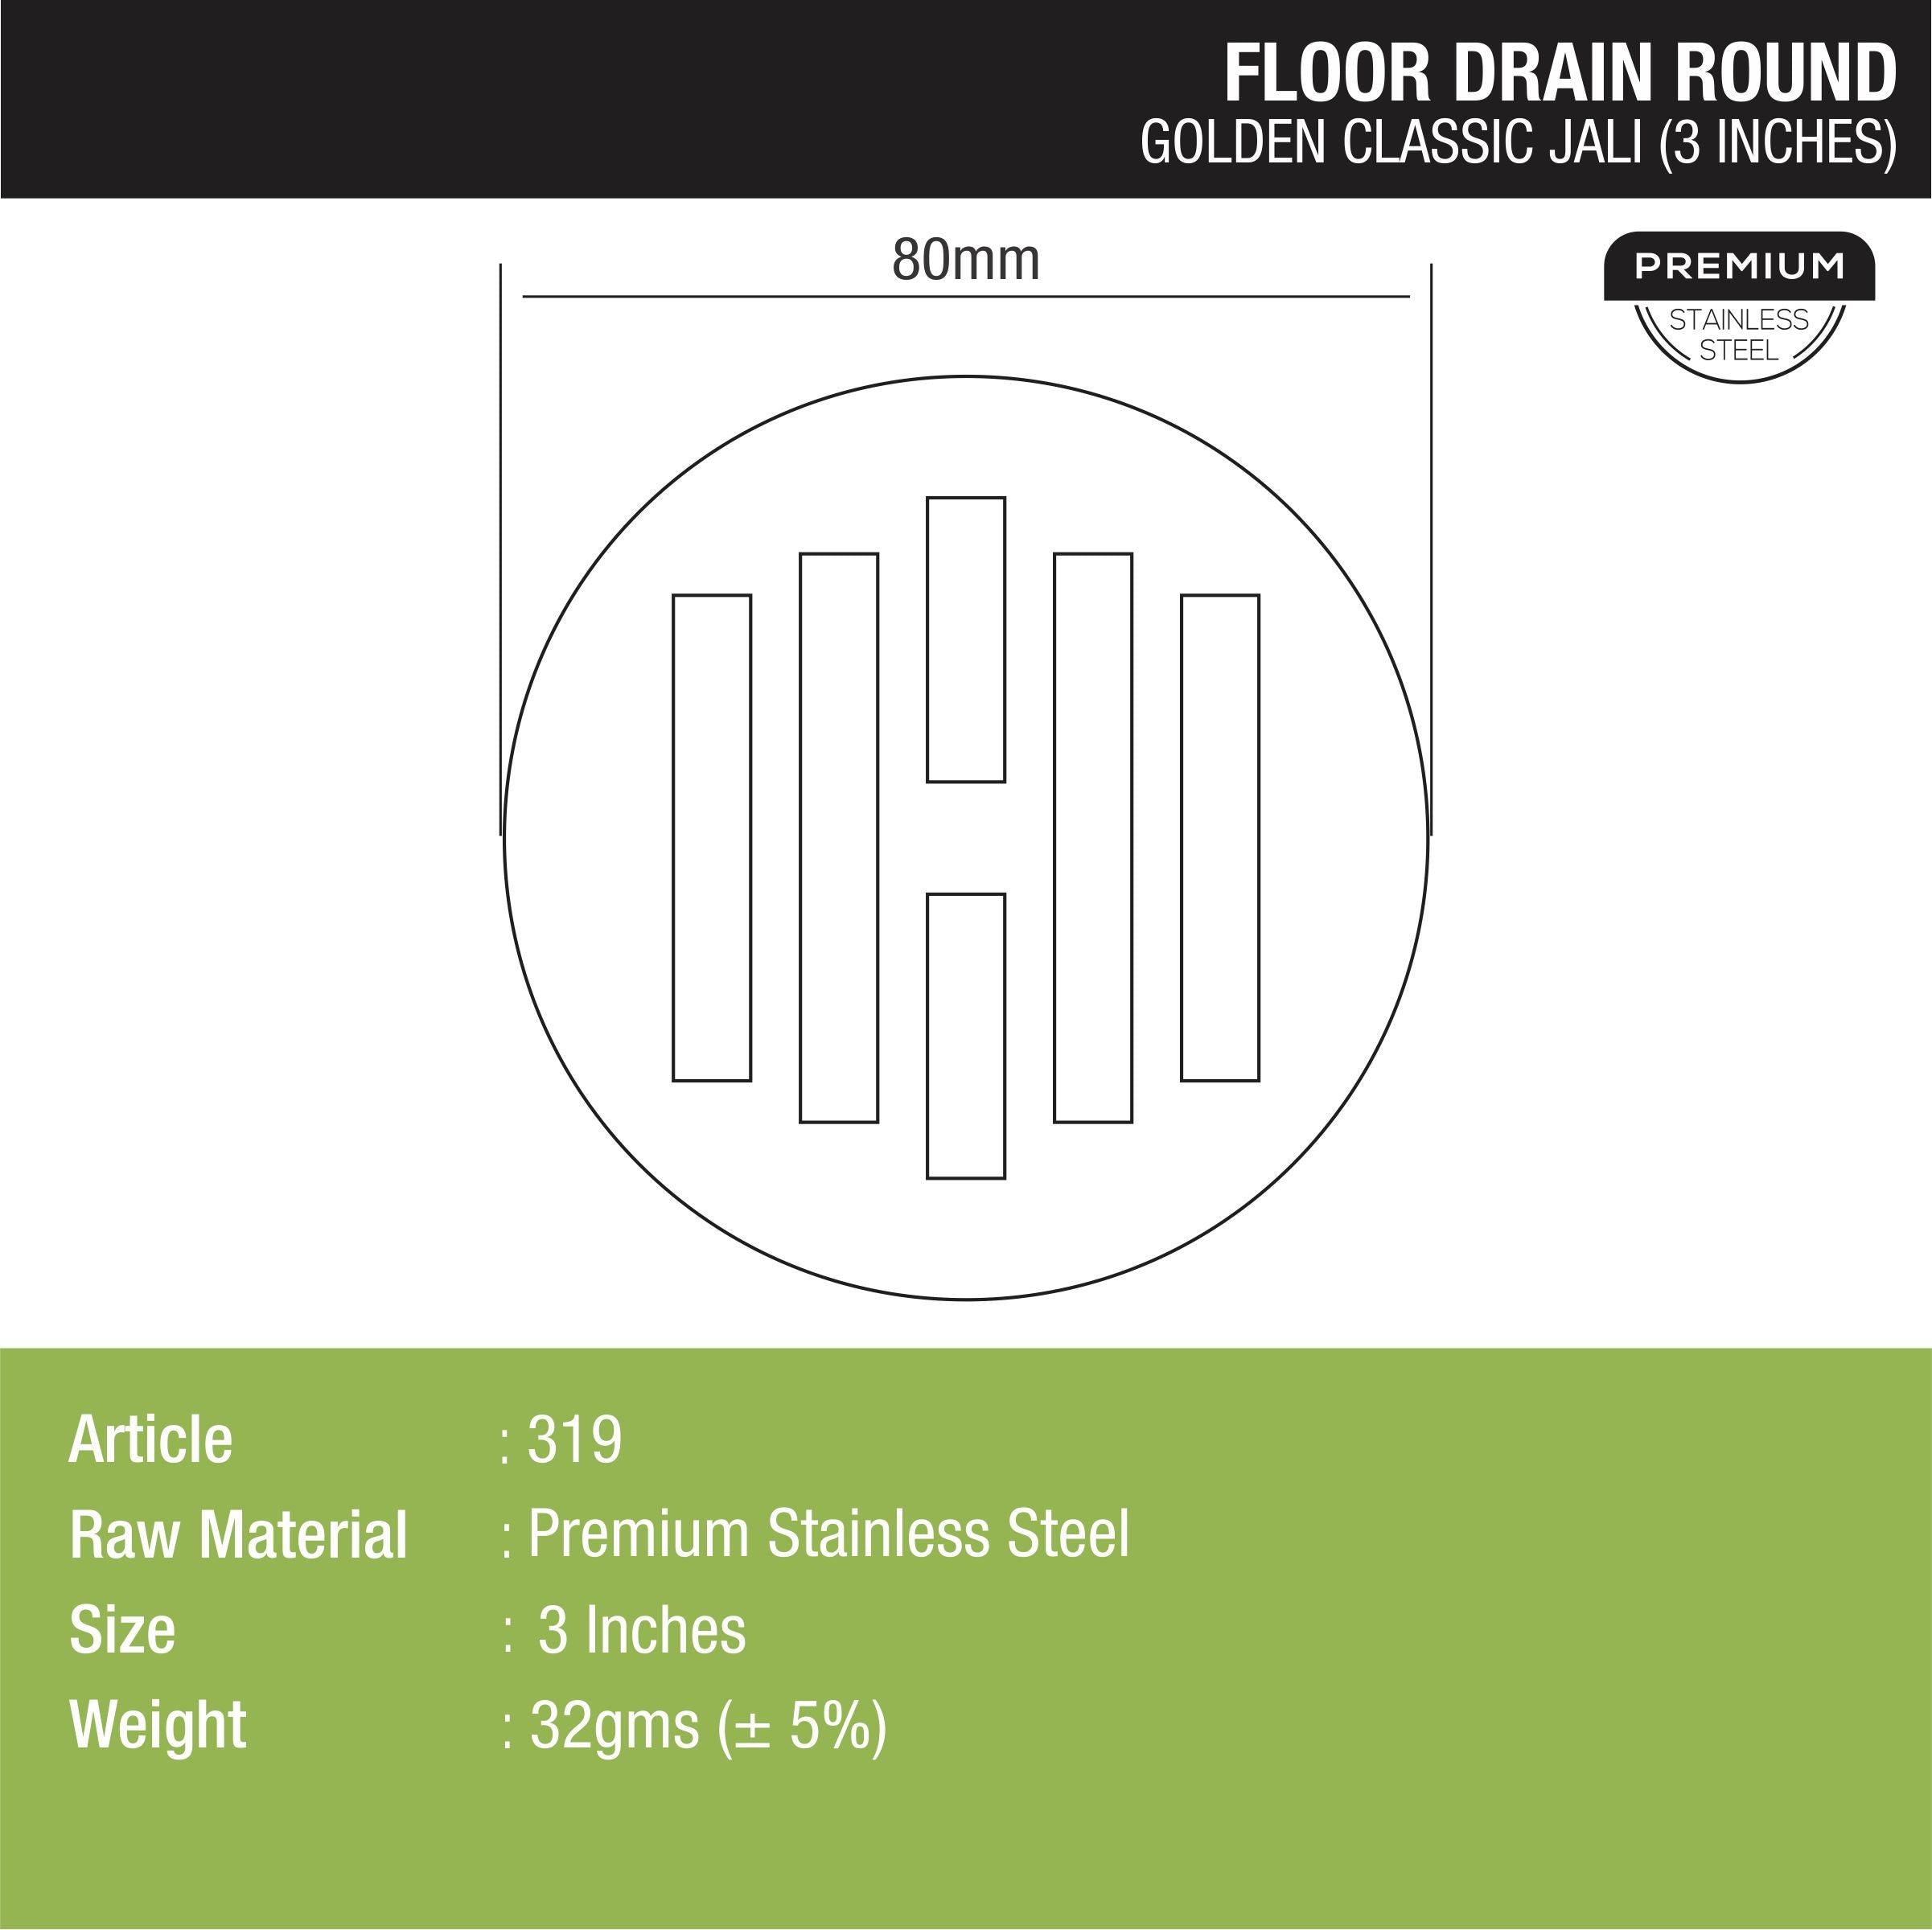 Golden Classic Jali Round Floor Drain (3 inches) dimensions and sizes